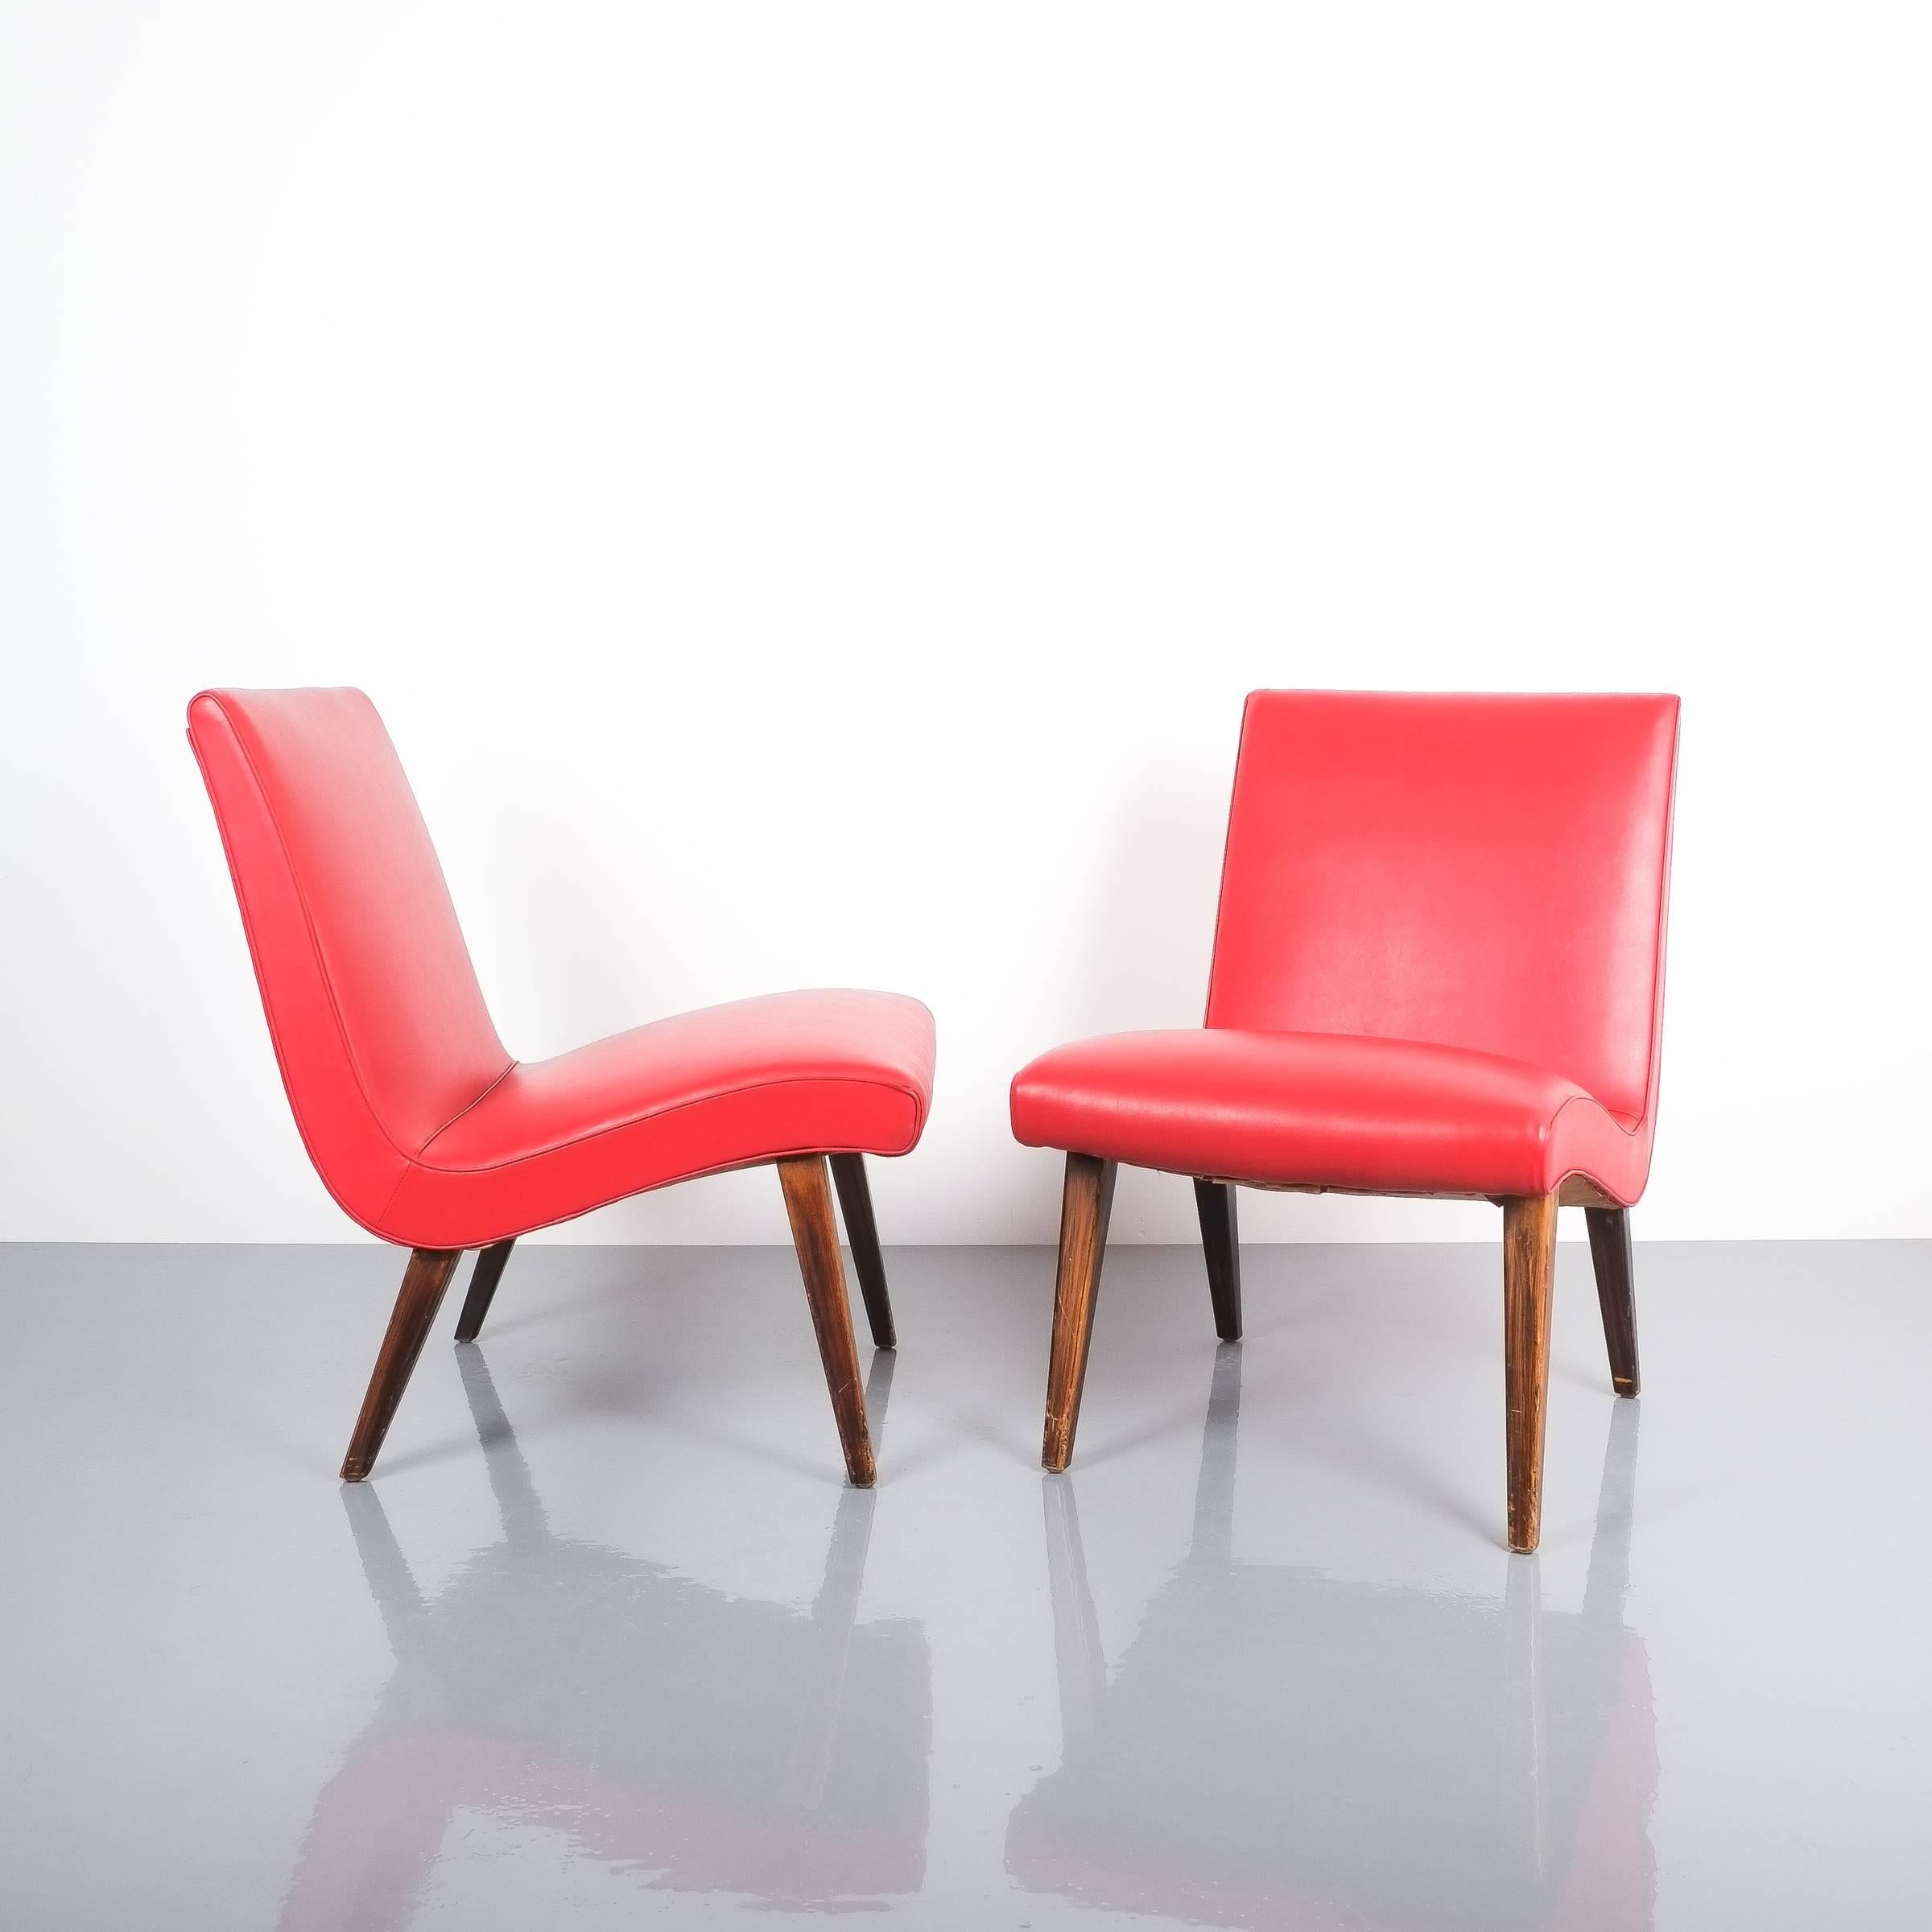 Mid-Century Modern Jens Risom Pair of Red Vinyl Faux Leather Chairs 1950 For Sale